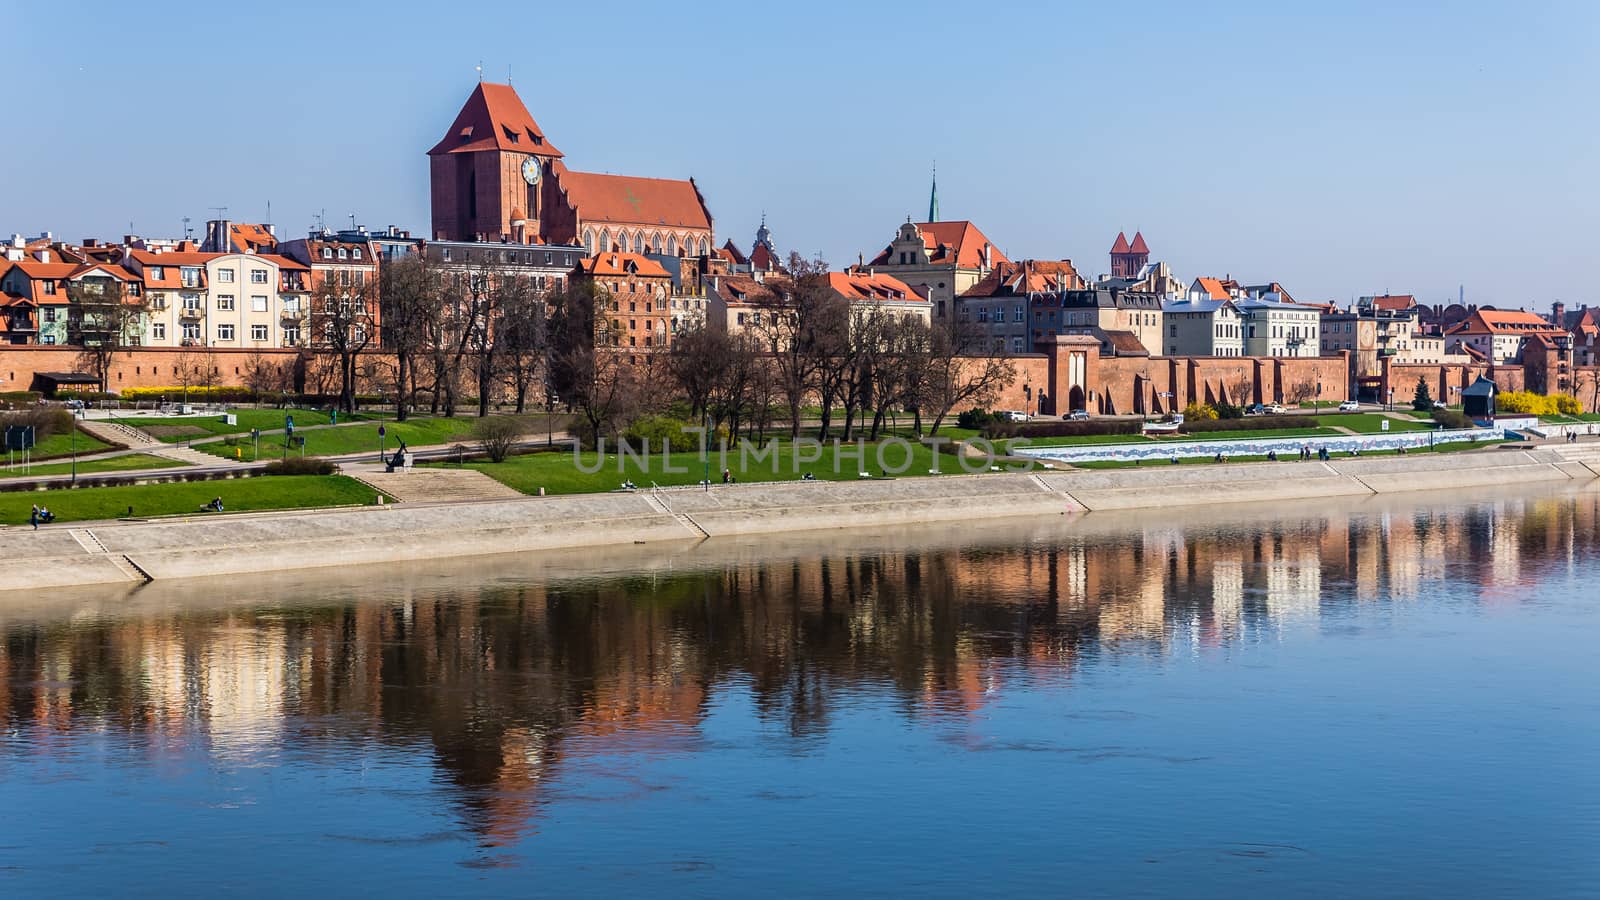 Panoramic view of the old town of Torun, Poland, taken out of the bridge over Vistula river. The Medieval Town of Torun is listed among UNESCO World Cultural and Natural Heritage sites.